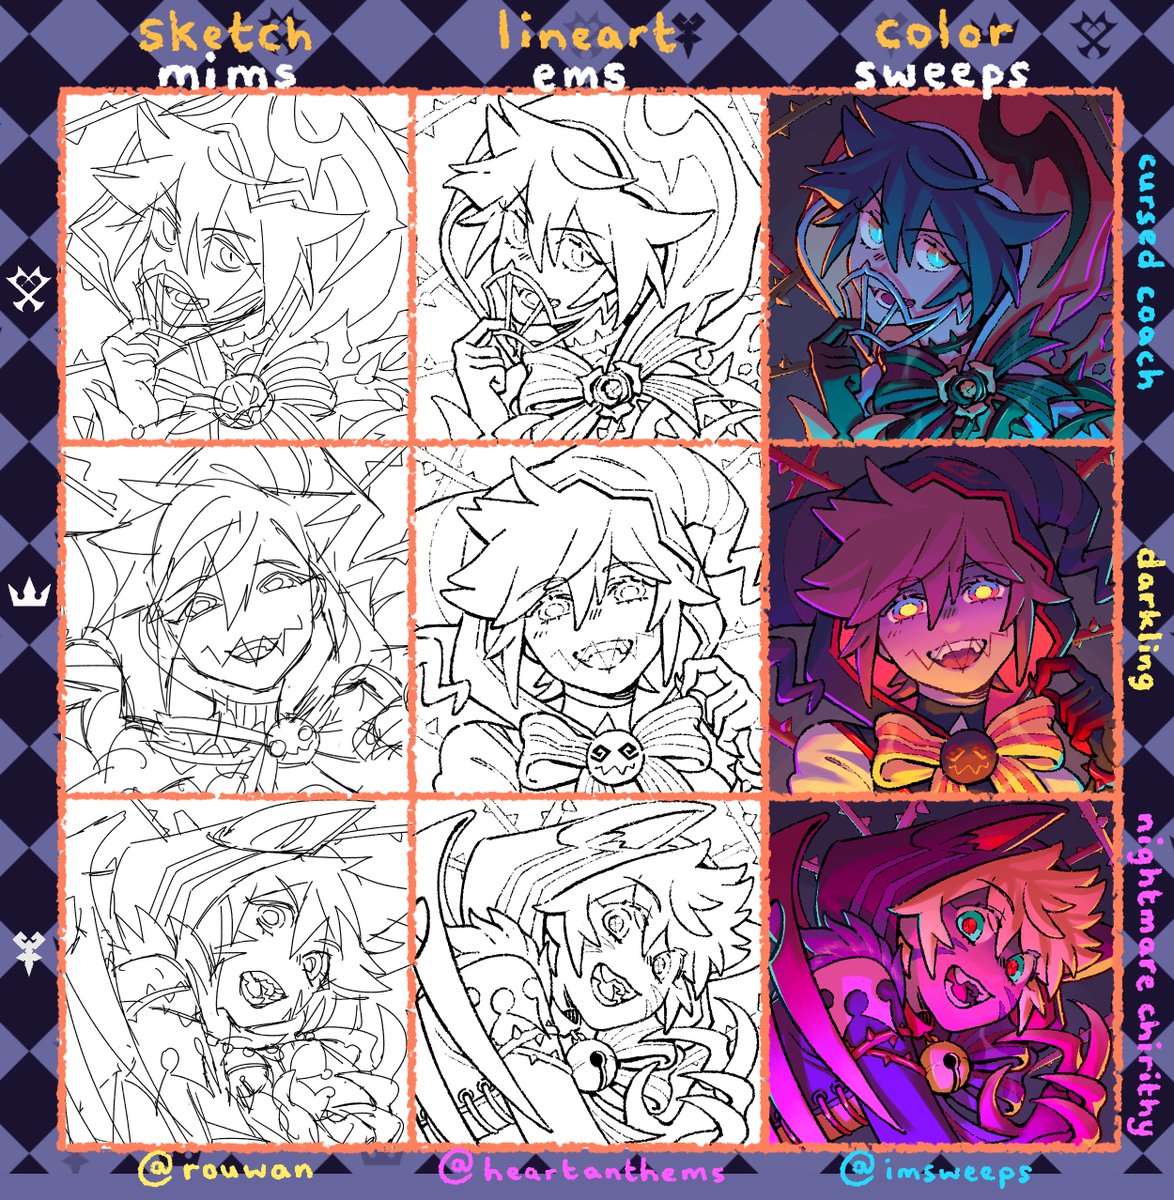 HOWDY, im very honored to say that for halloween i'm matching kh icons with @heartanthems and @rouwan >:) and we each did a part for them! HERE'S THE WONDERFUL PROCESS FOR THESE LADS 